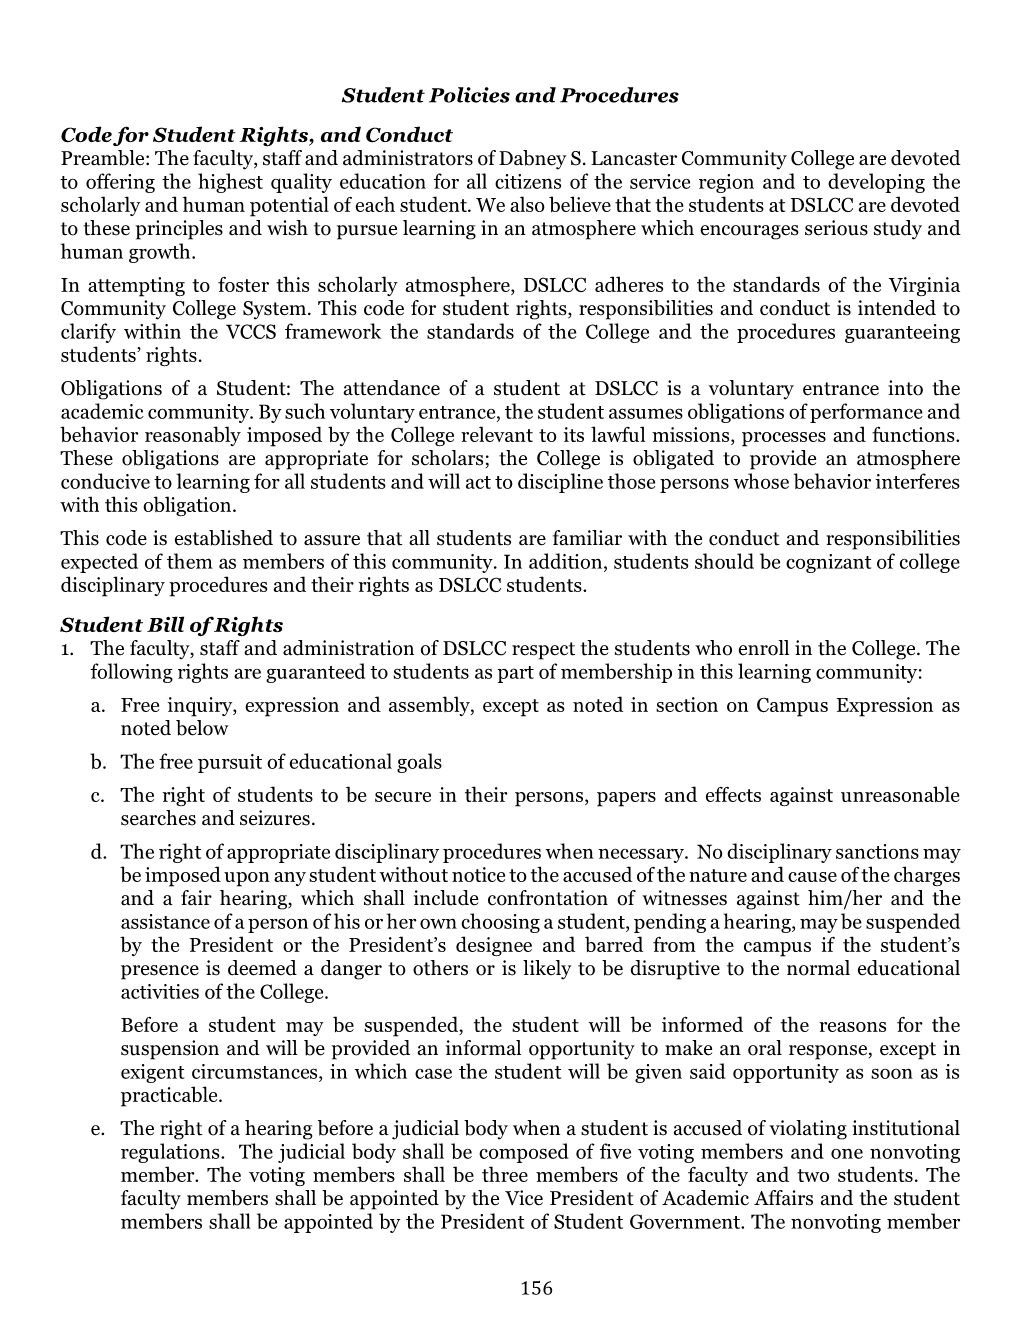 Student Policies and Procedures Code for Student Rights, and Conduct Preamble: the Faculty, Staff and Administrators of Dabney S